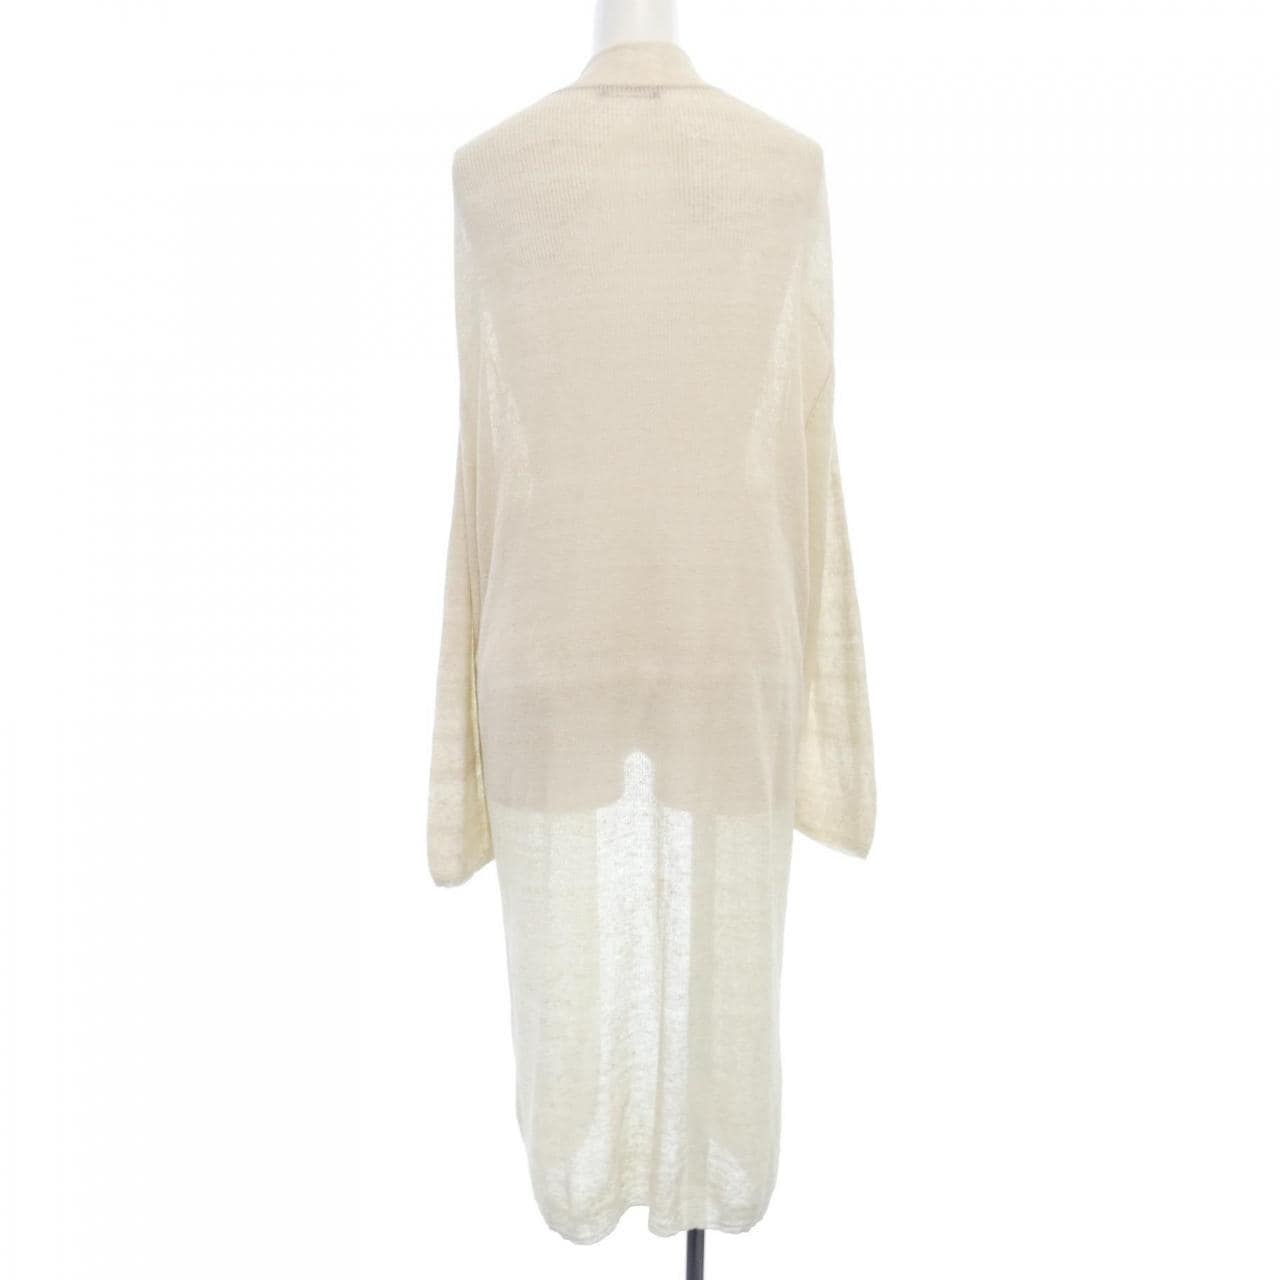 Theory luxe long cardigan